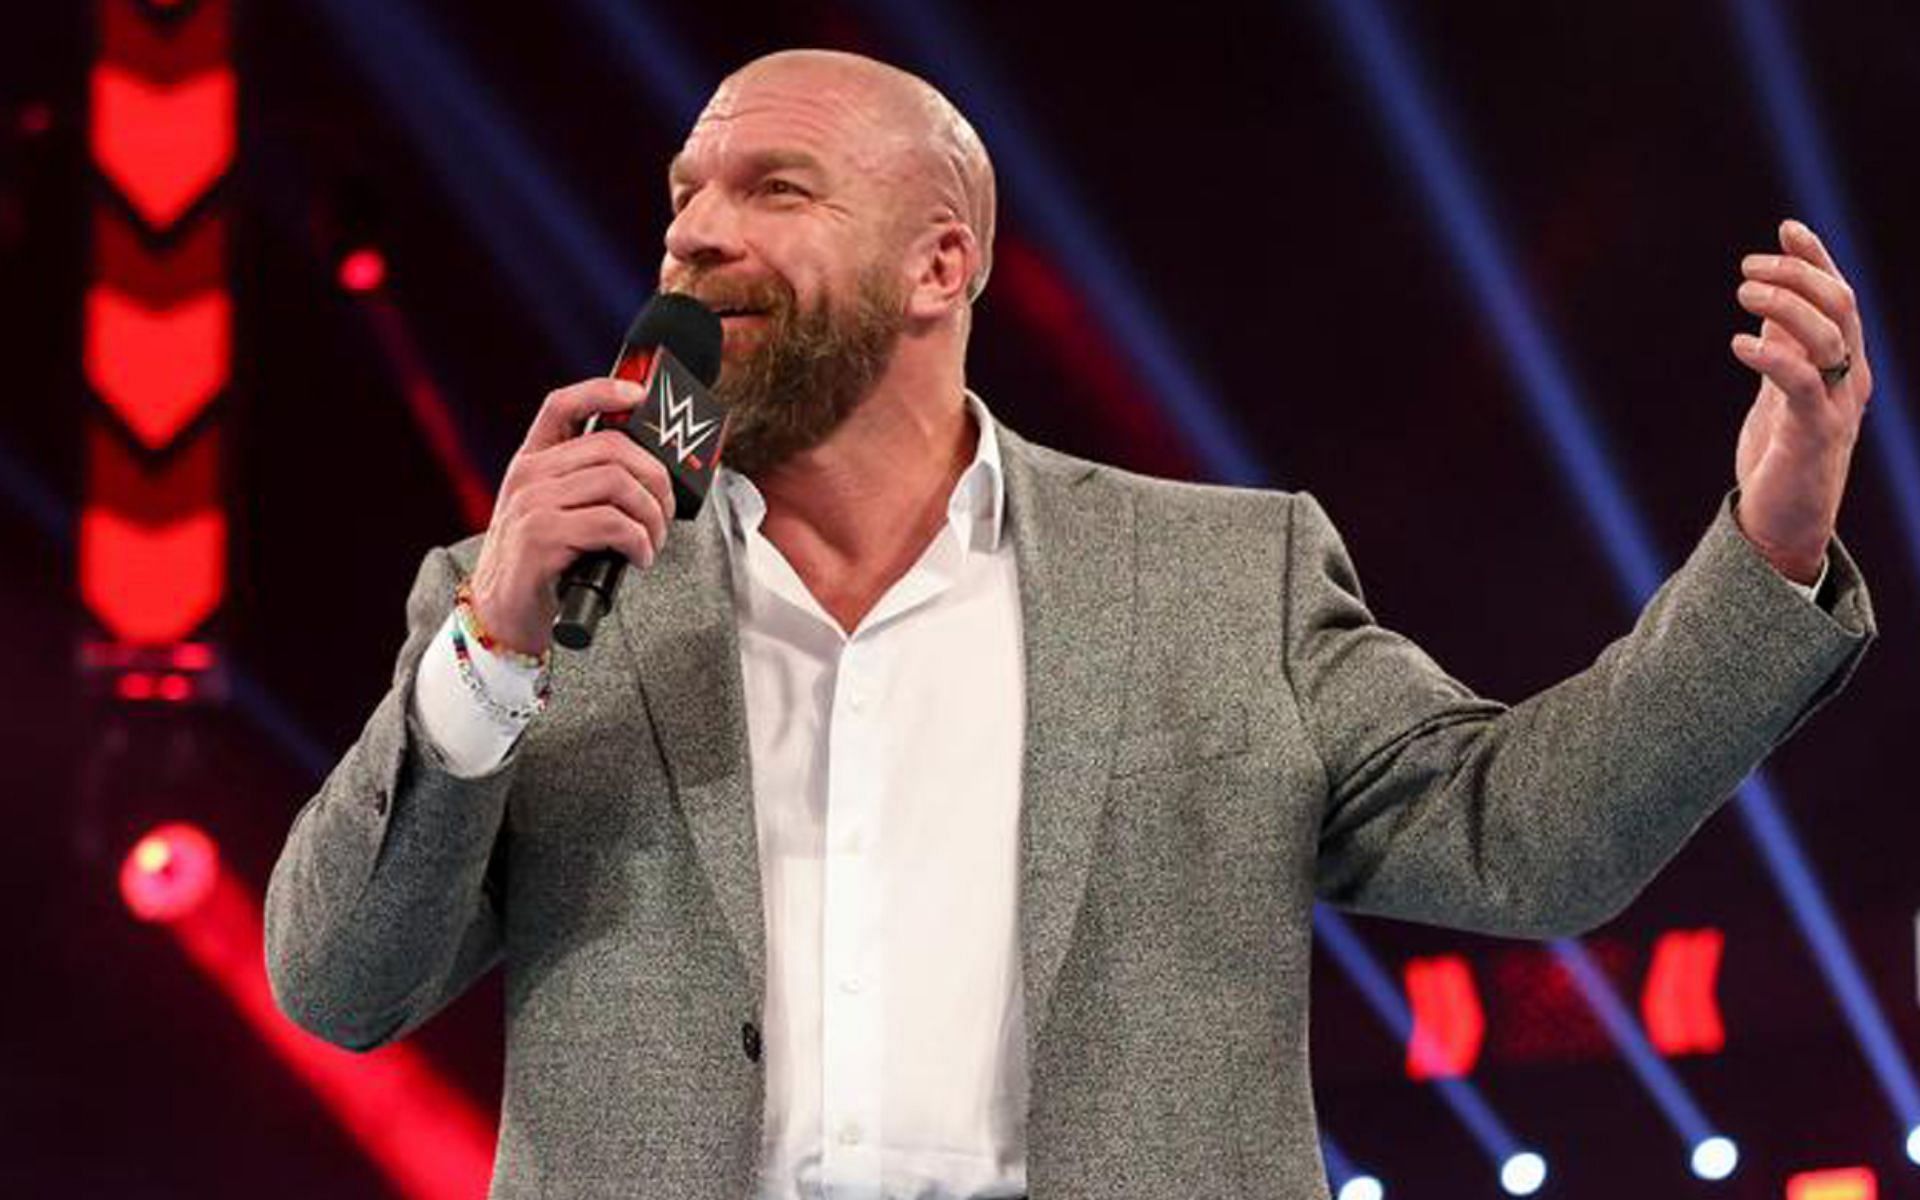 Triple H has gained positive reviews ever since taking over as Head of WWE Creative.